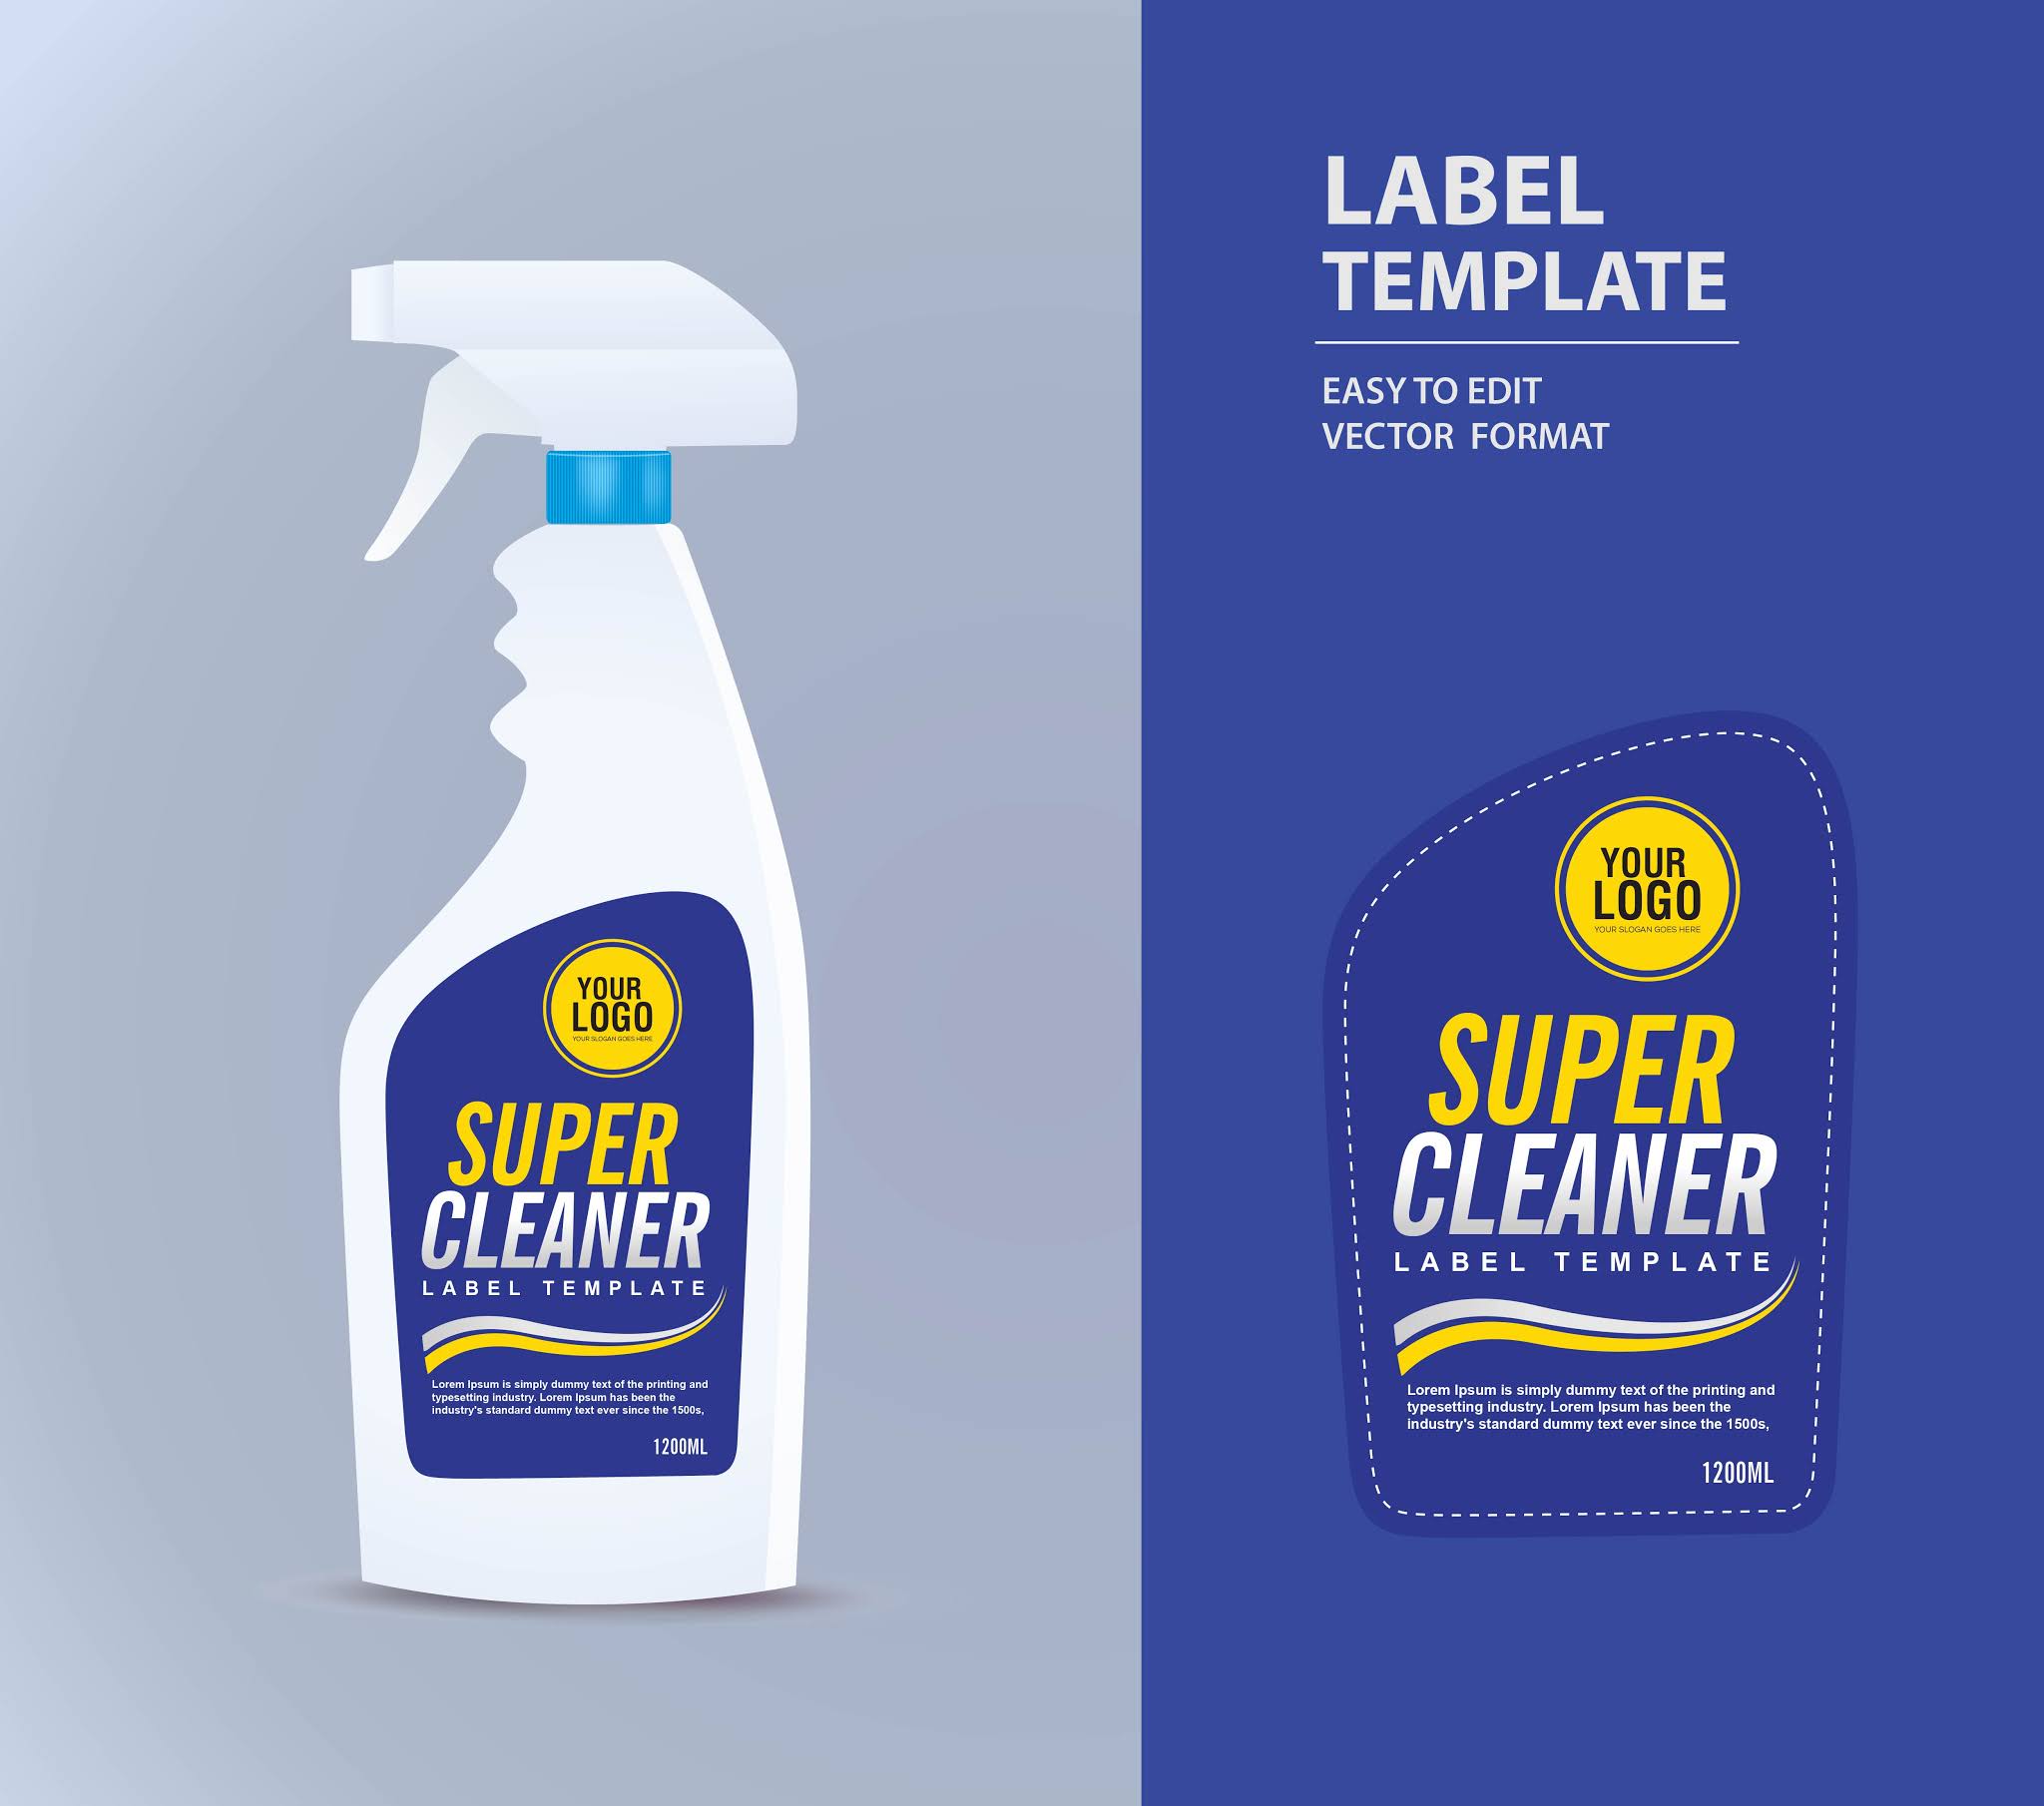 Detergent product designs stickers cleaning products in vector eps format